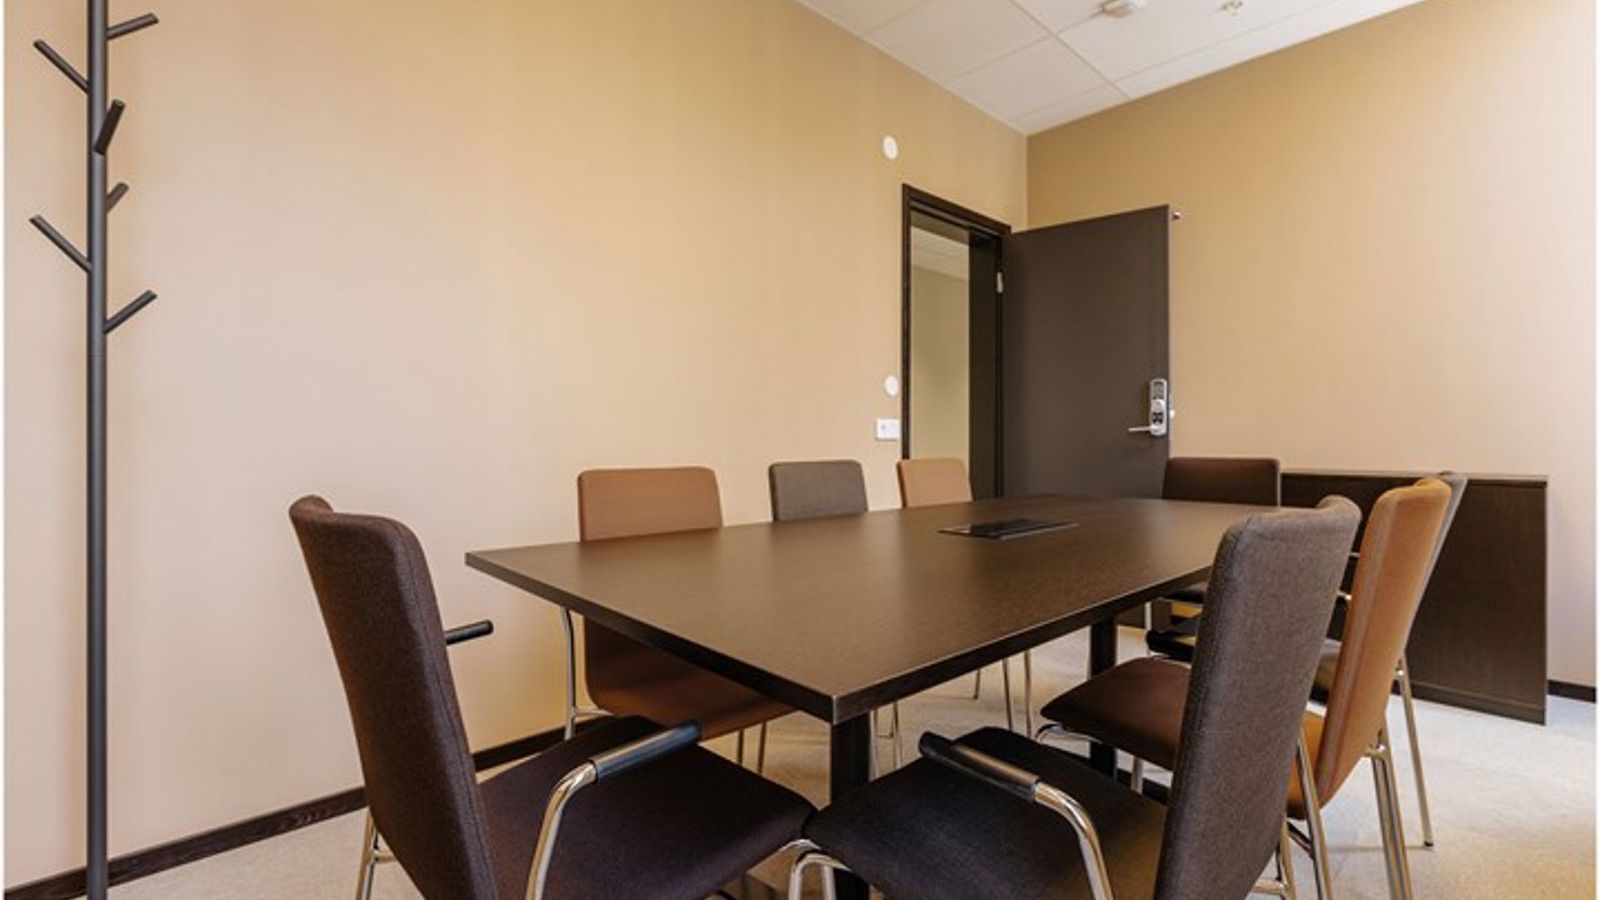 Group room with board seating, in brown tones